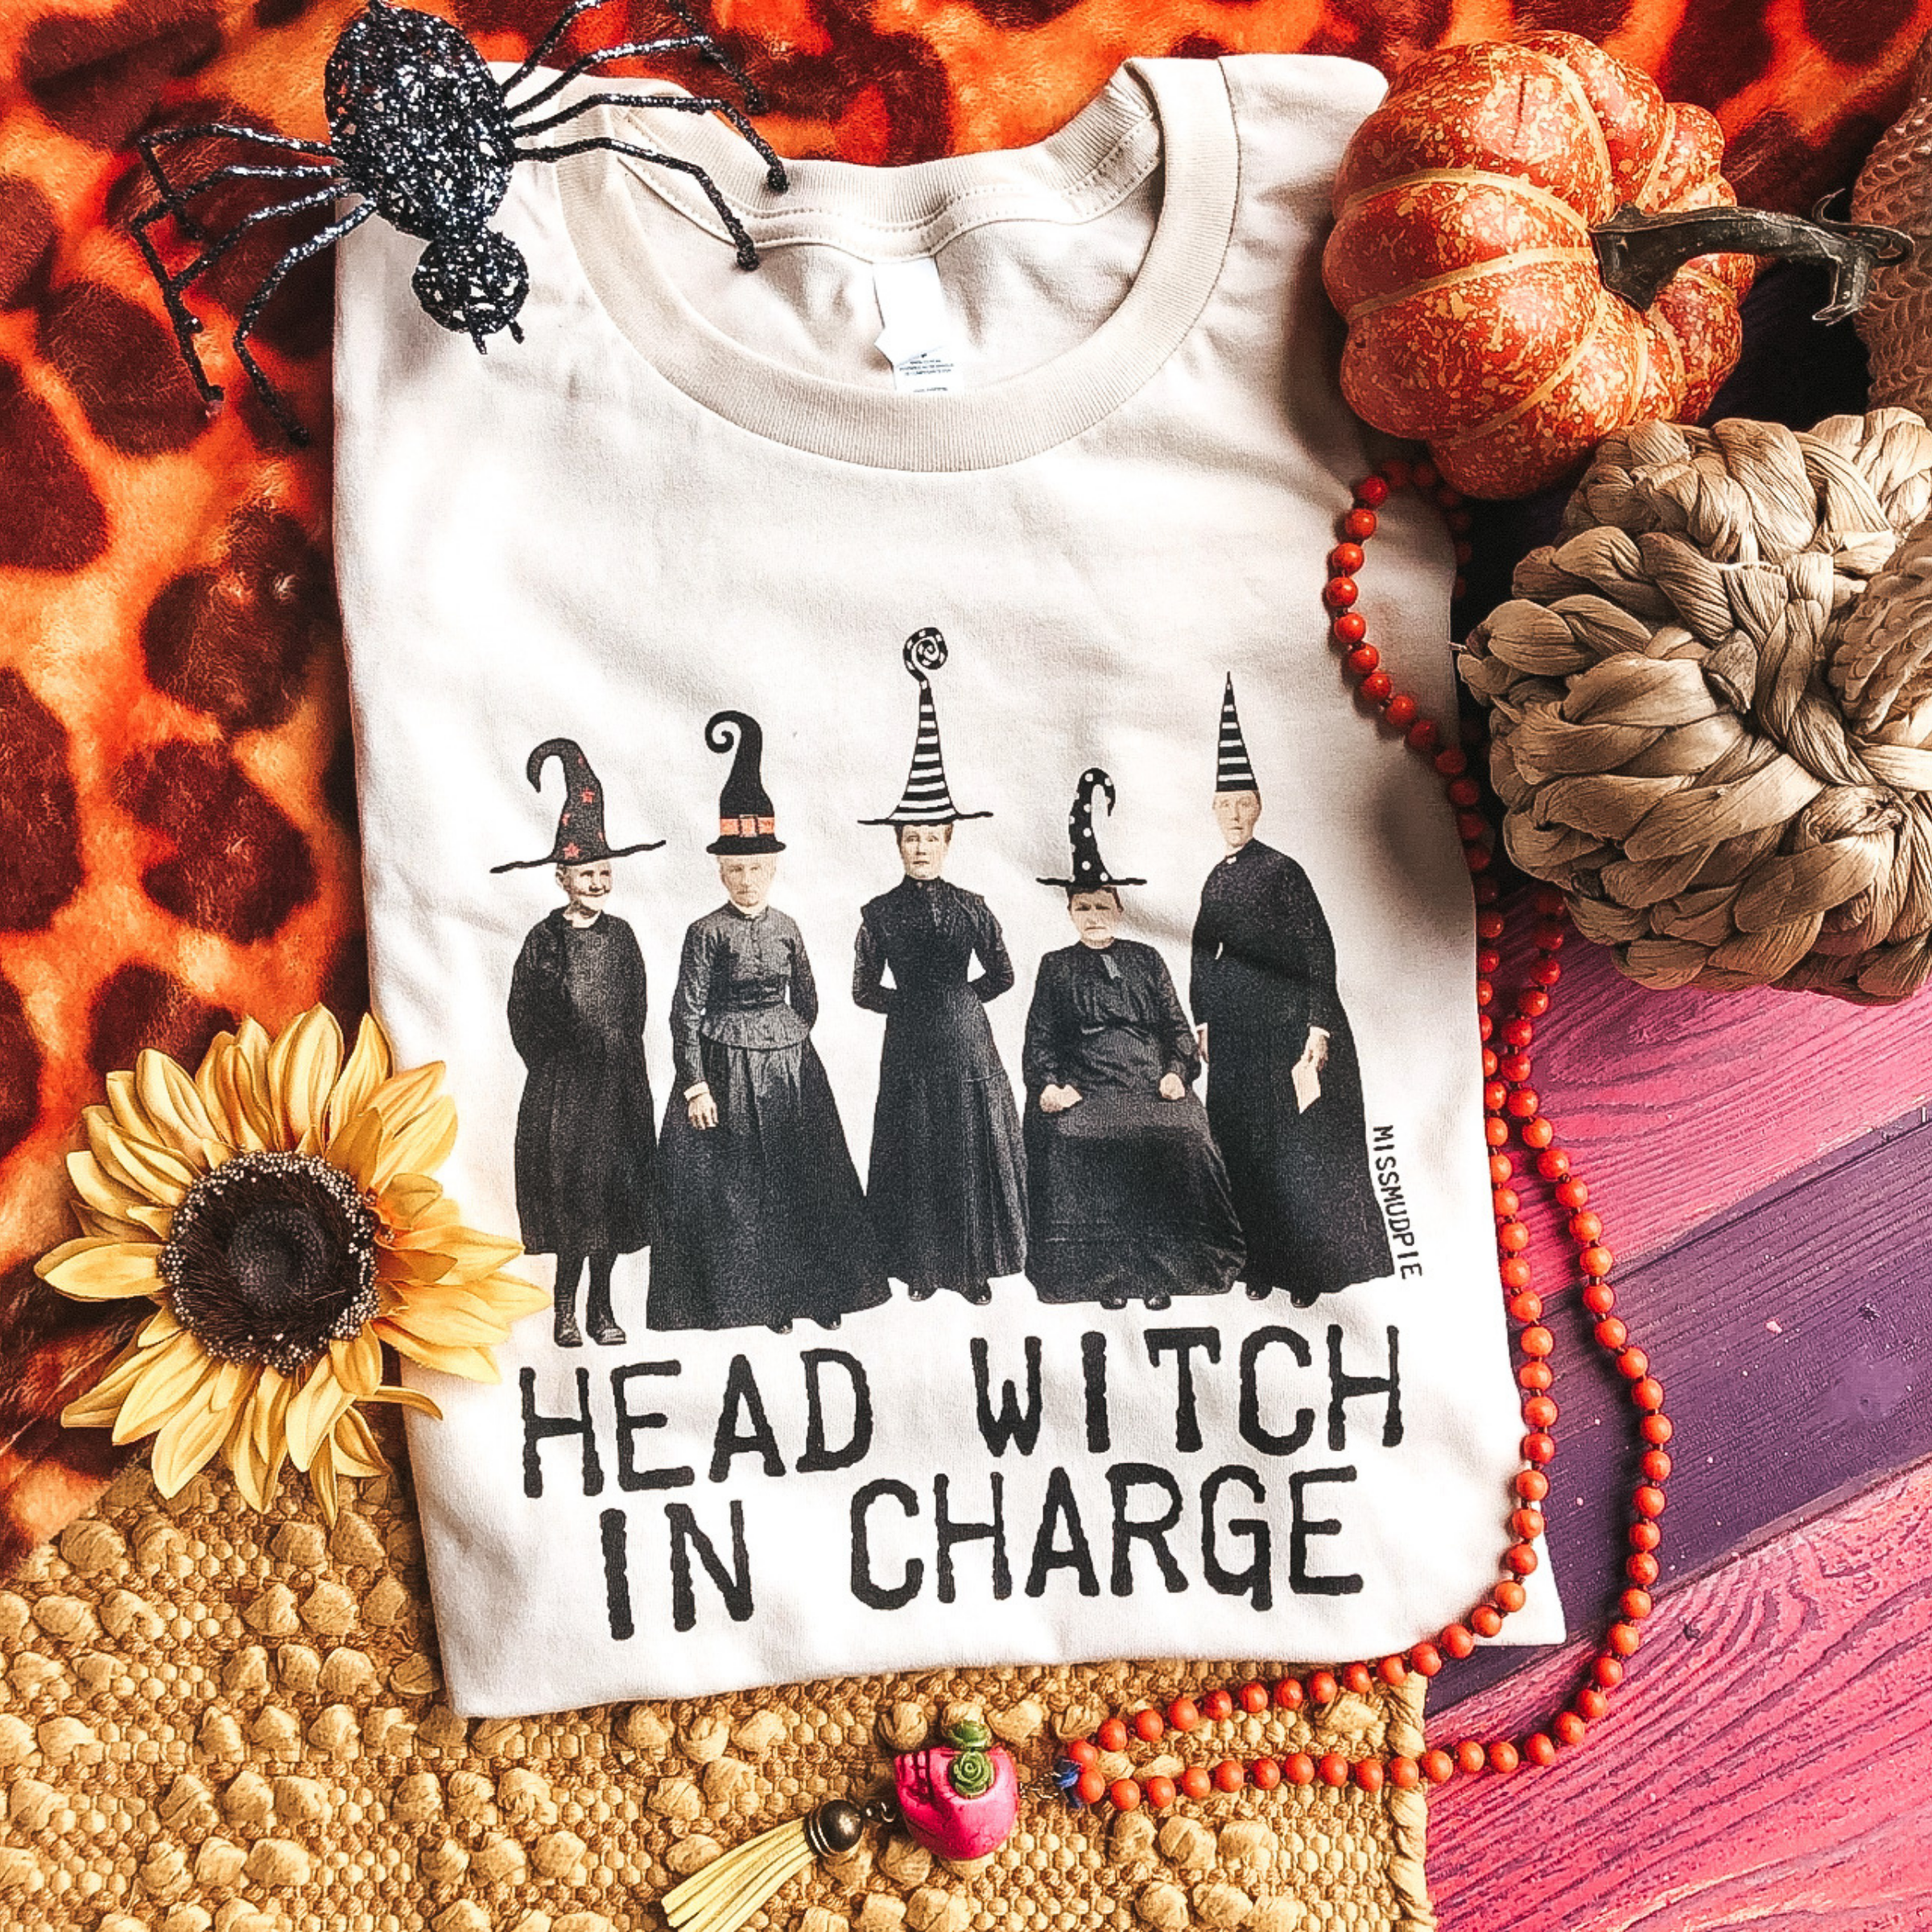 Cream tee shirt with 5 witches lined up with words "head witch in charge" below.  Shirt seen with pumpkins, sunflower, spider and cute decorations.